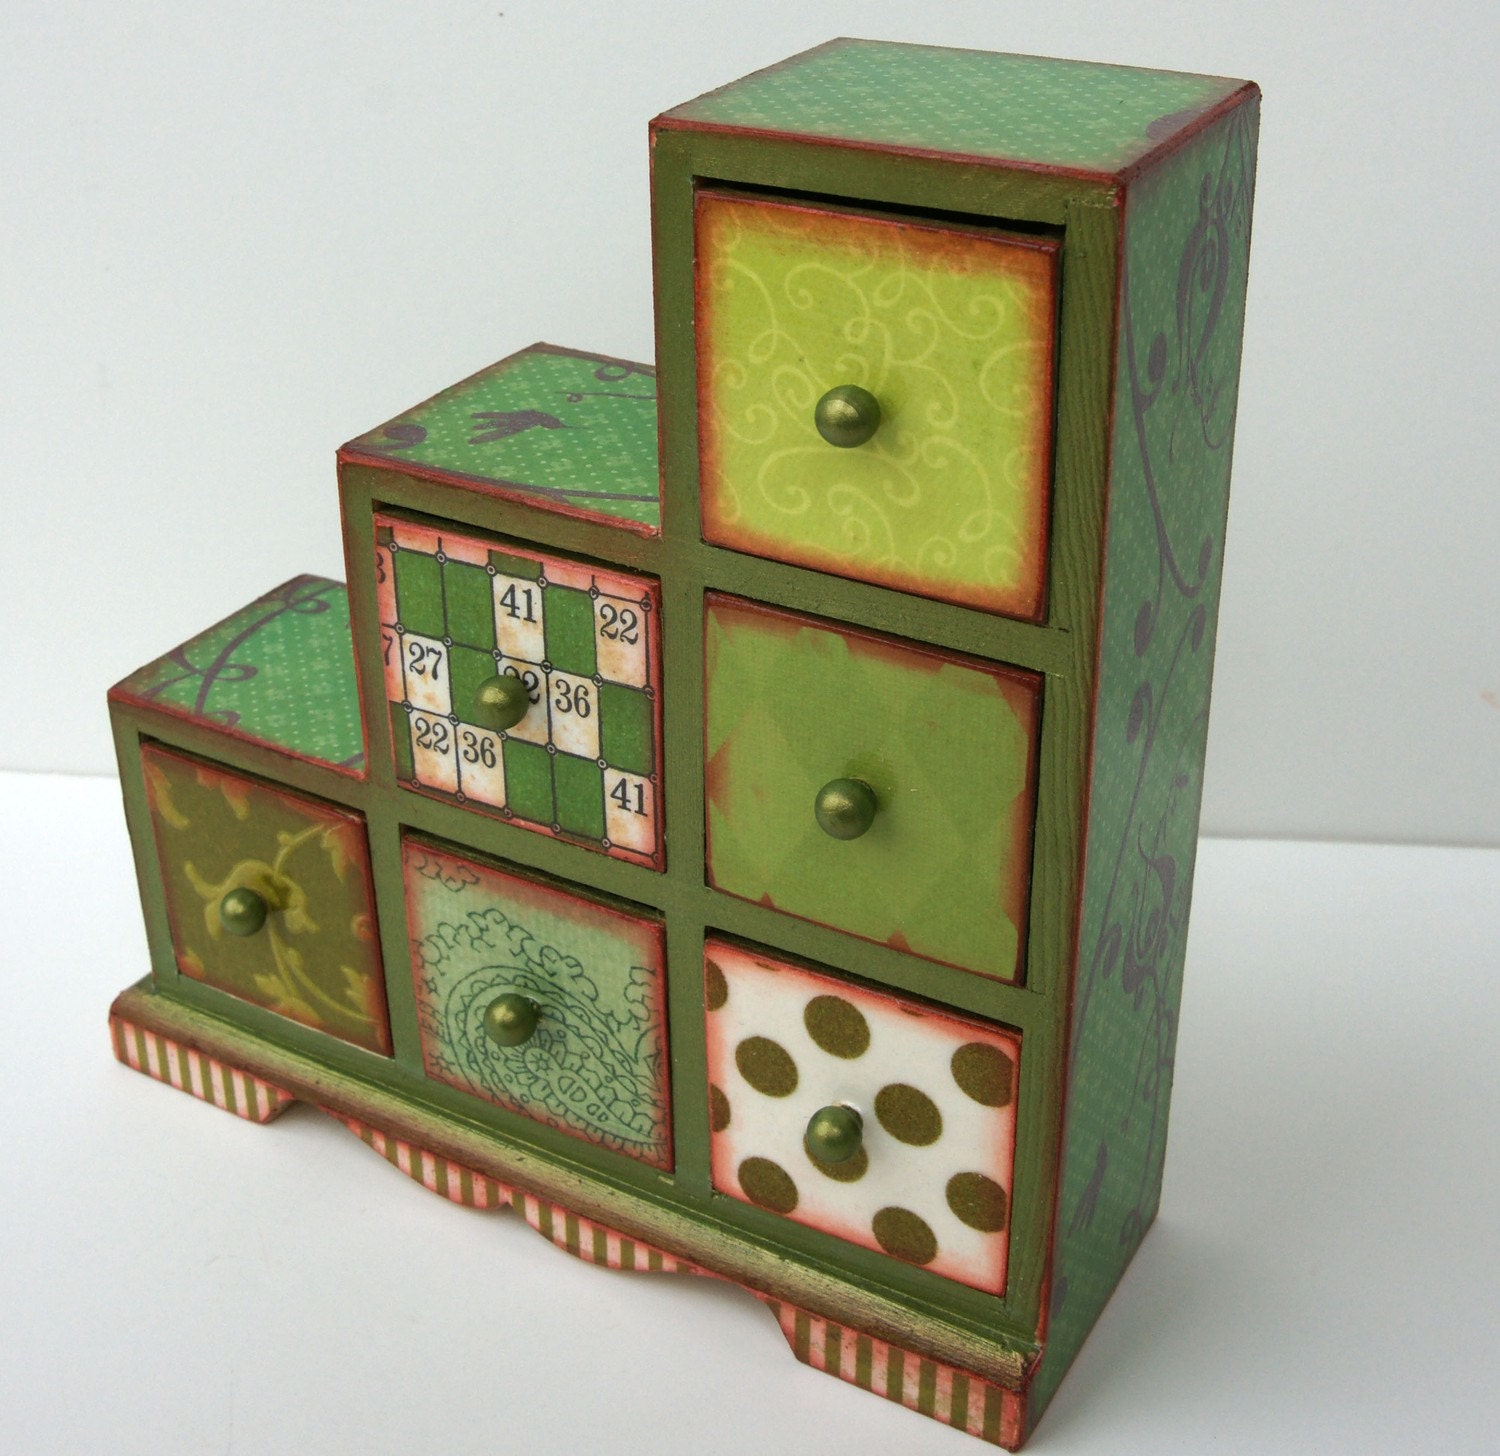 cute little boxes http://ny-image3.etsy.com/il_570xN.206122351.jpg